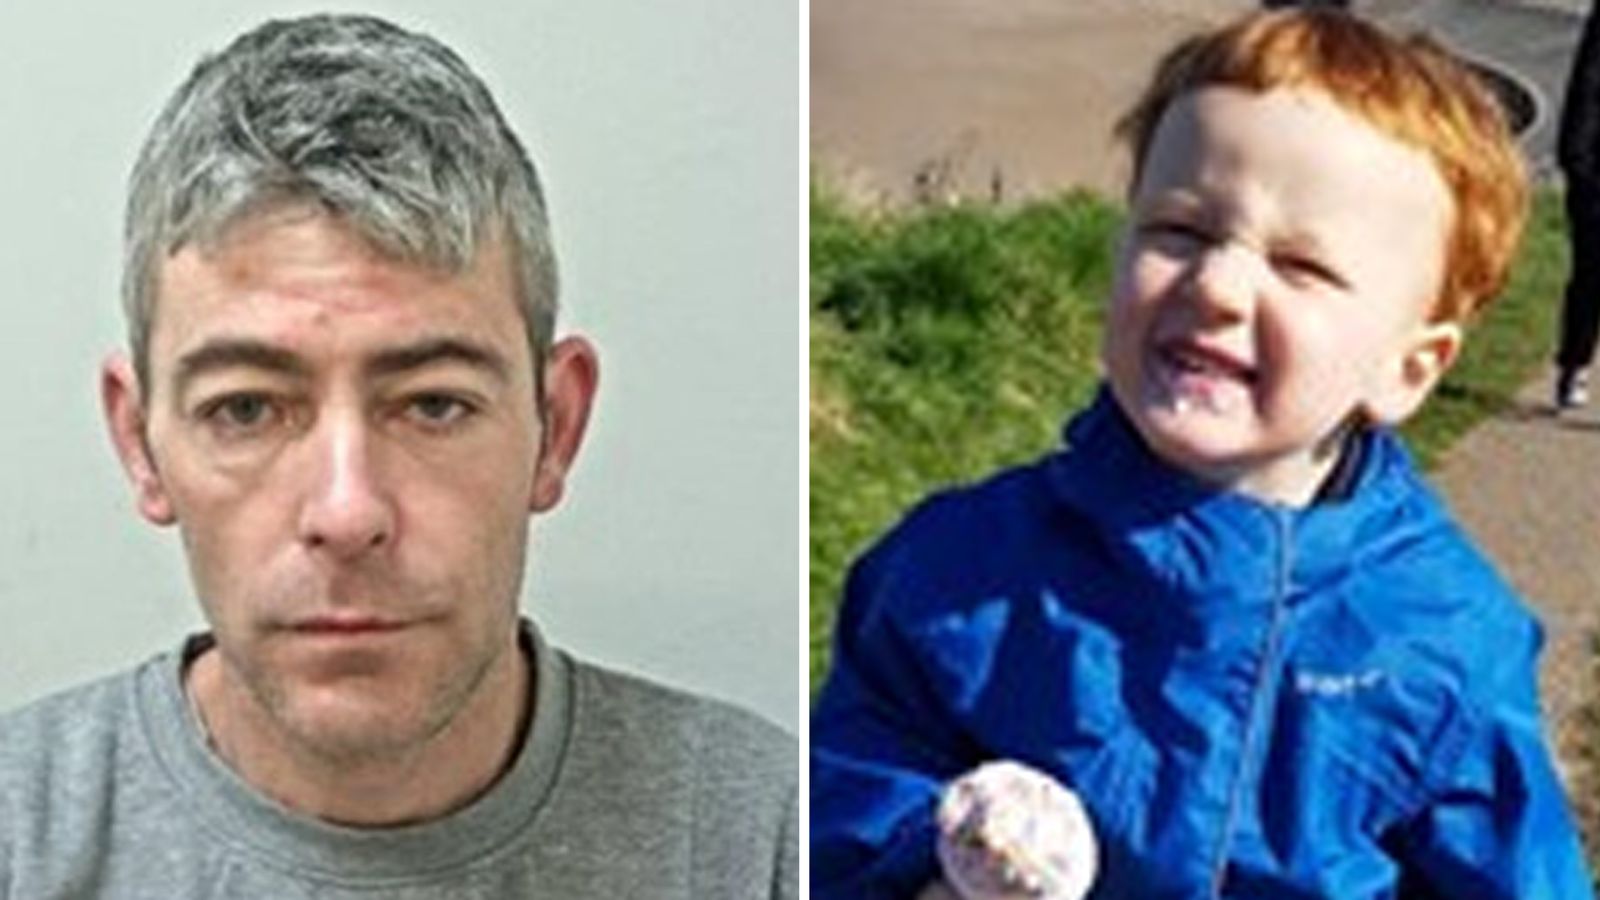 'Neighbour from hell' jailed for manslaughter after gas explosion that killed toddler